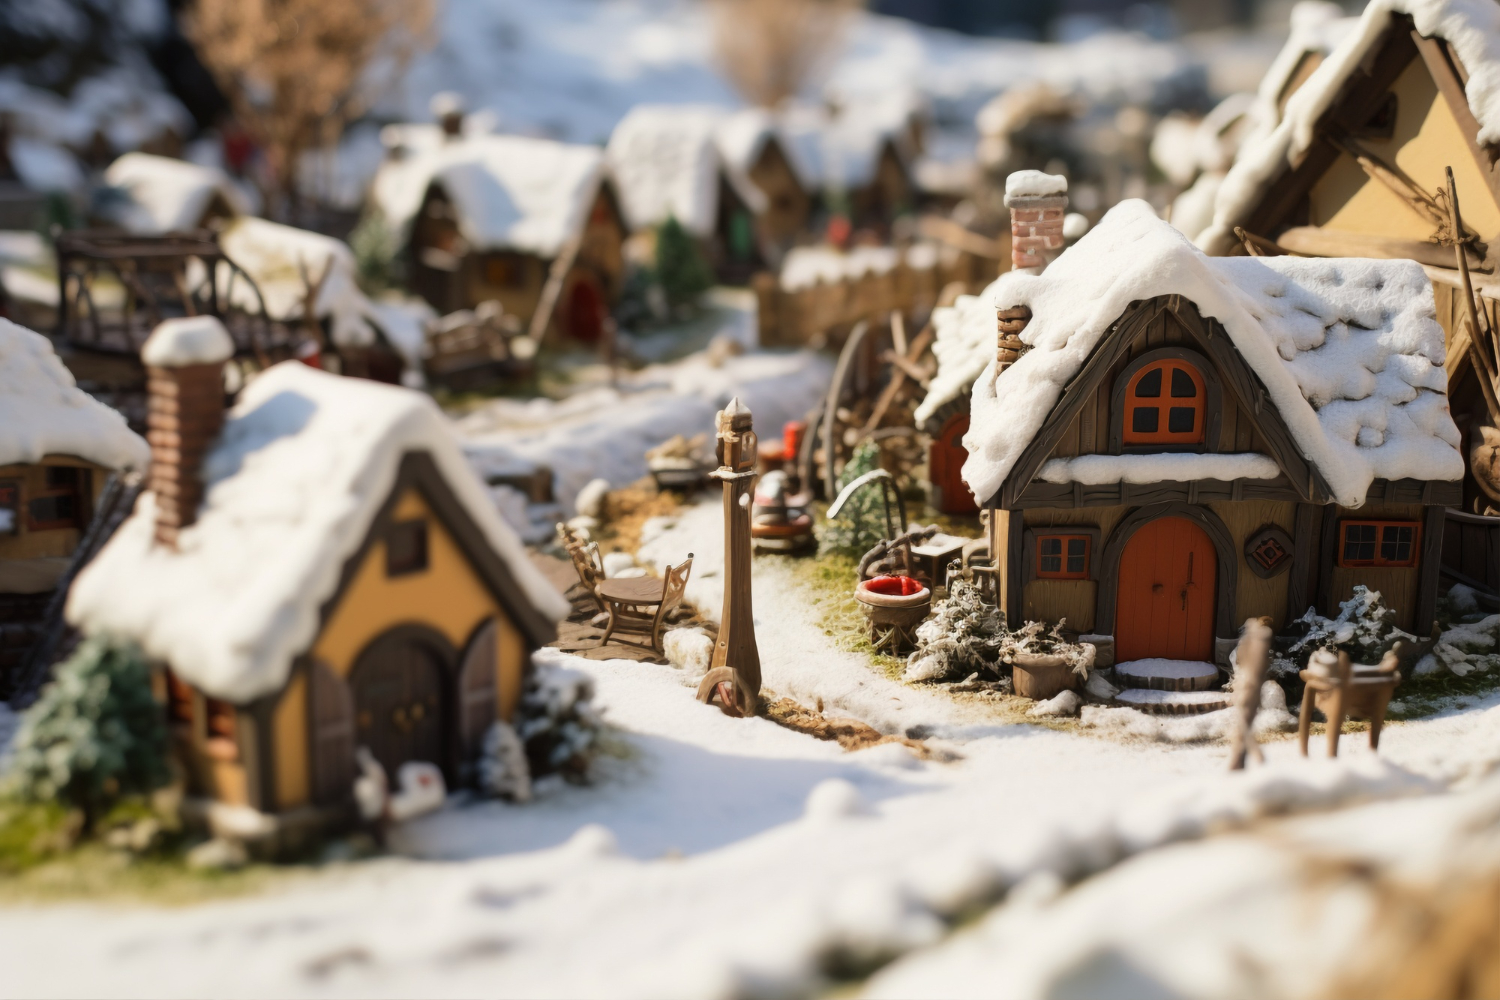 A miniature village is depicted in a snowy landscape, showcasing the charm of a Christmas village display.